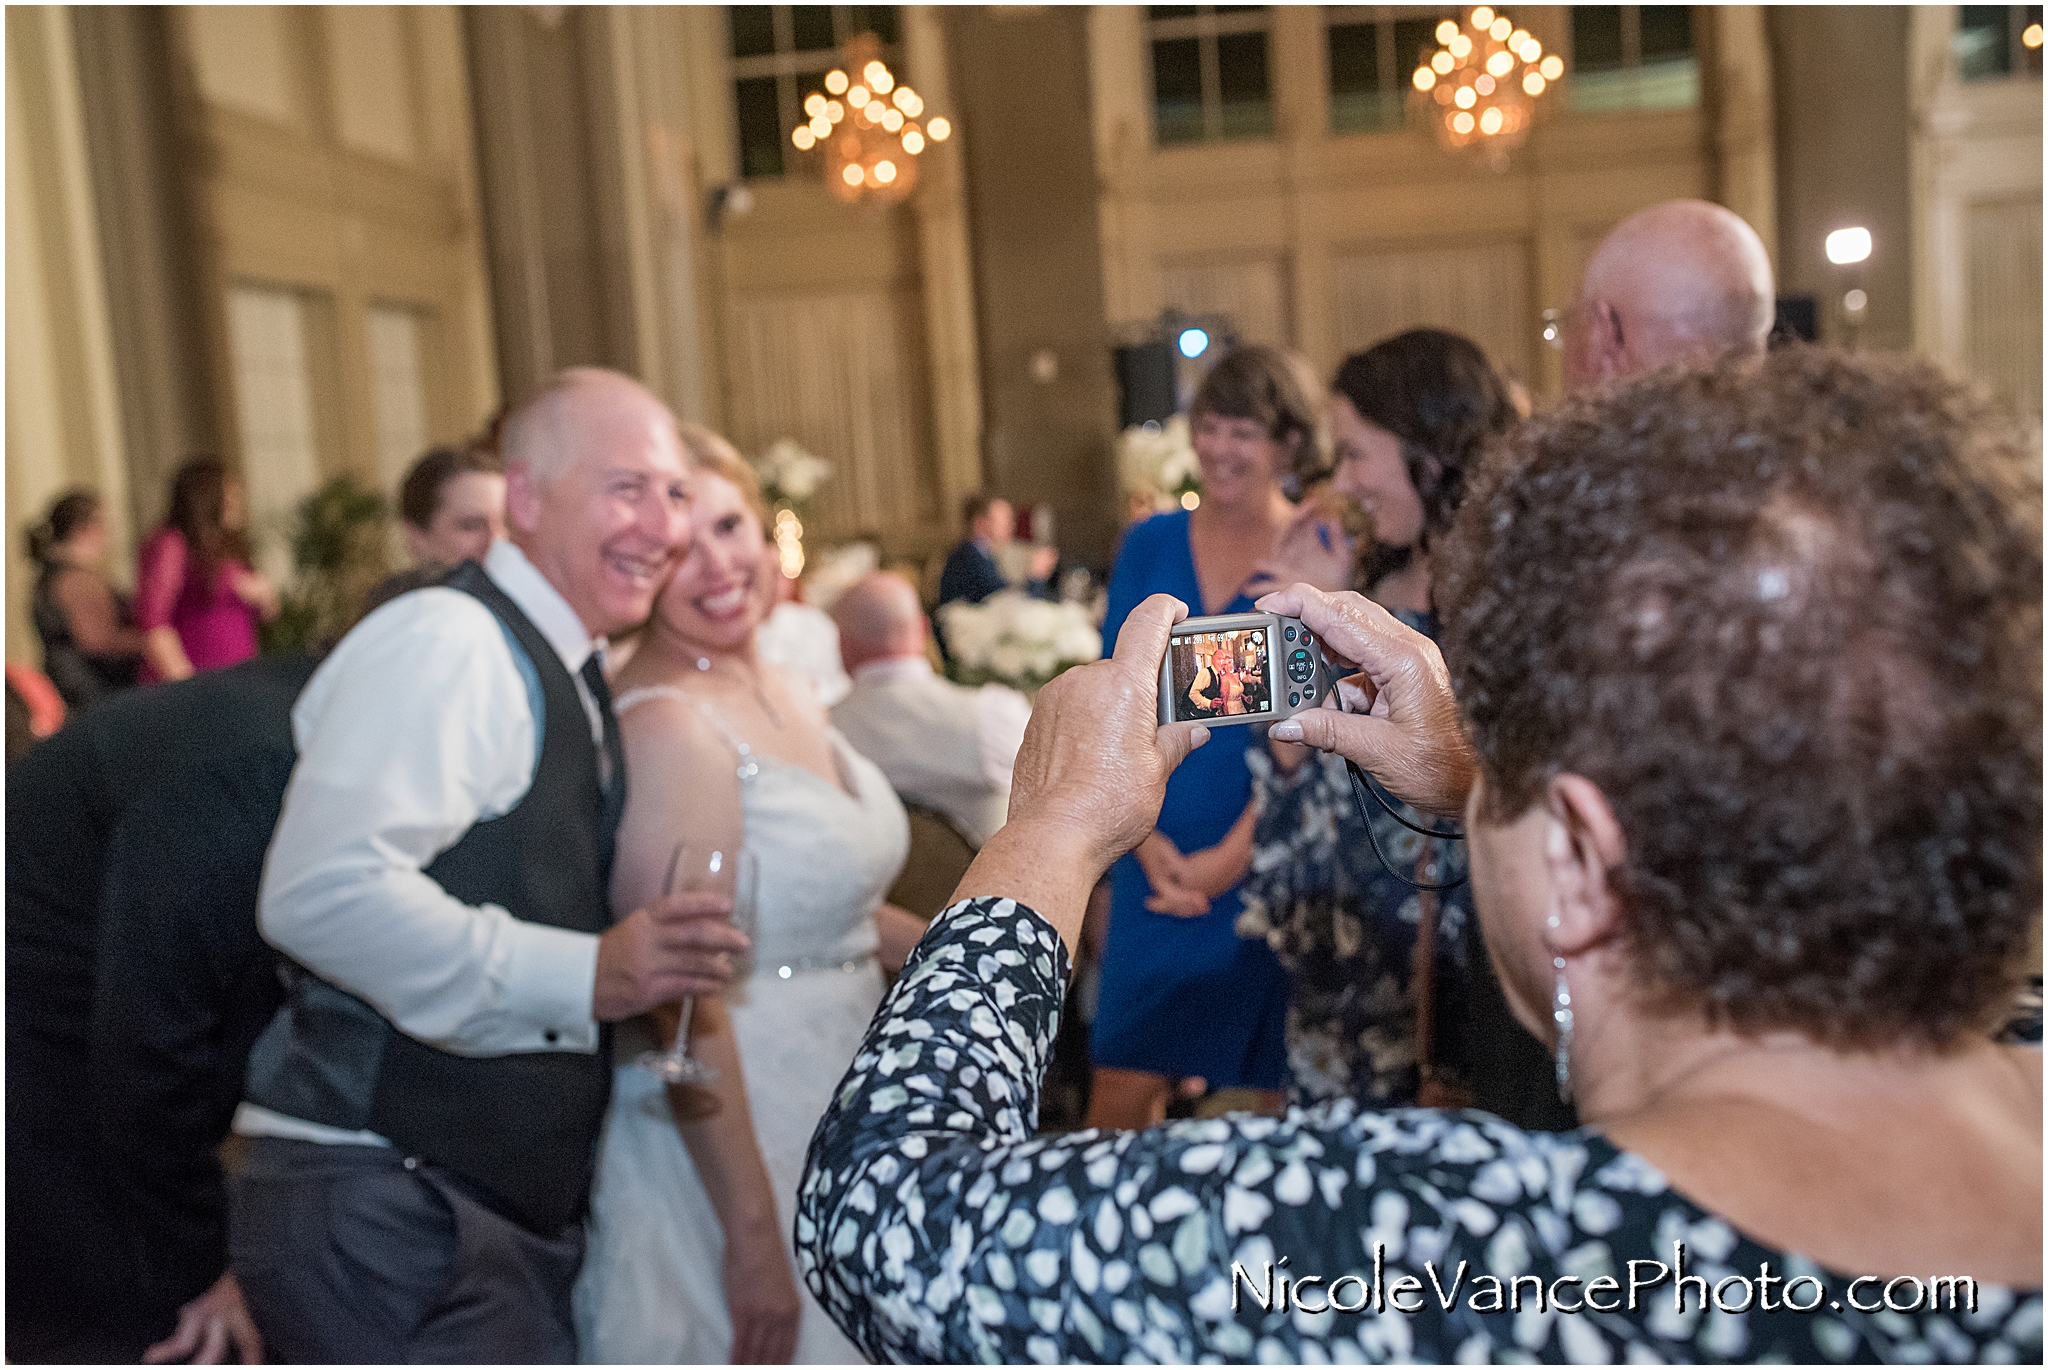 Behind the scenes during a wedding reception at the John Marshall Hotel.